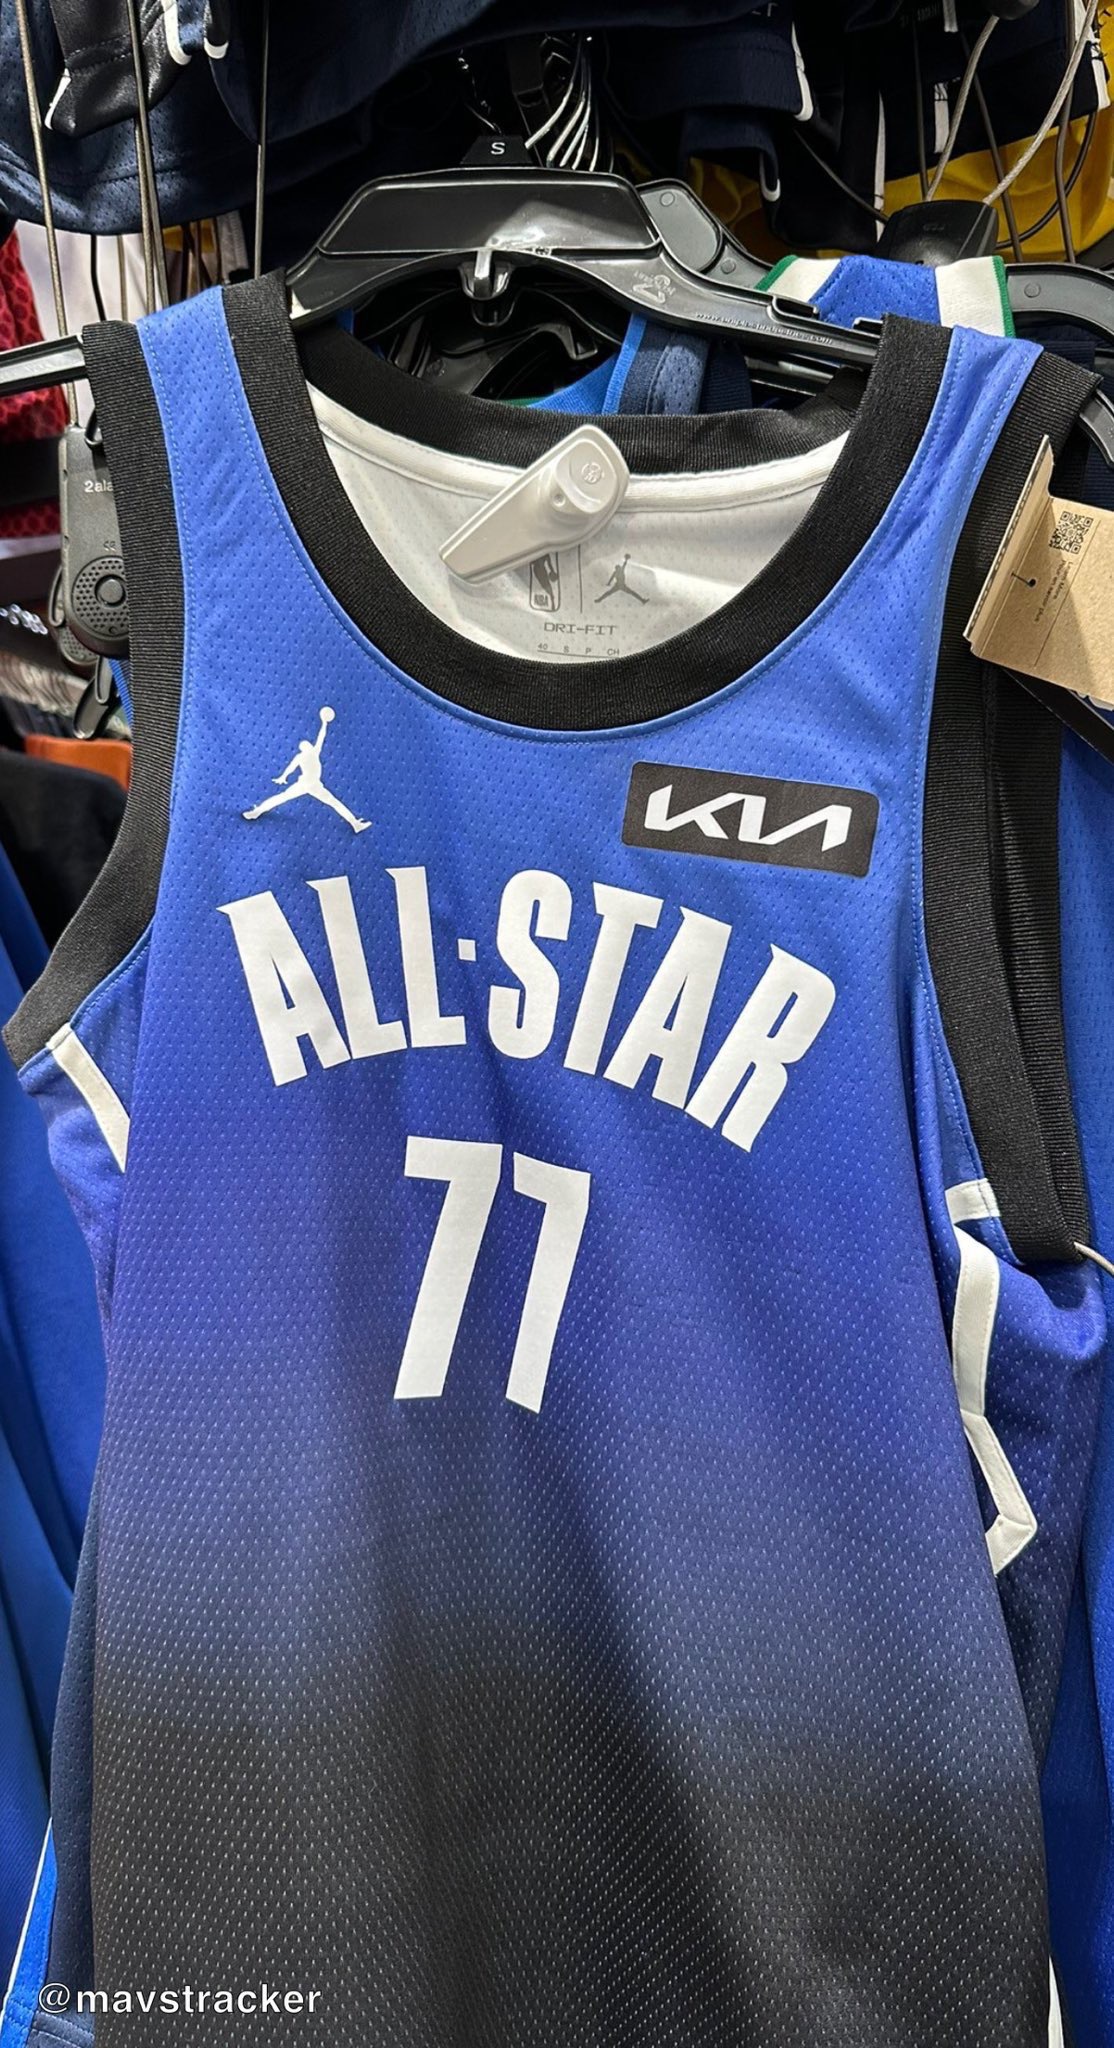 All Star NBA jerseys in stock now.Hit me up if you are interested